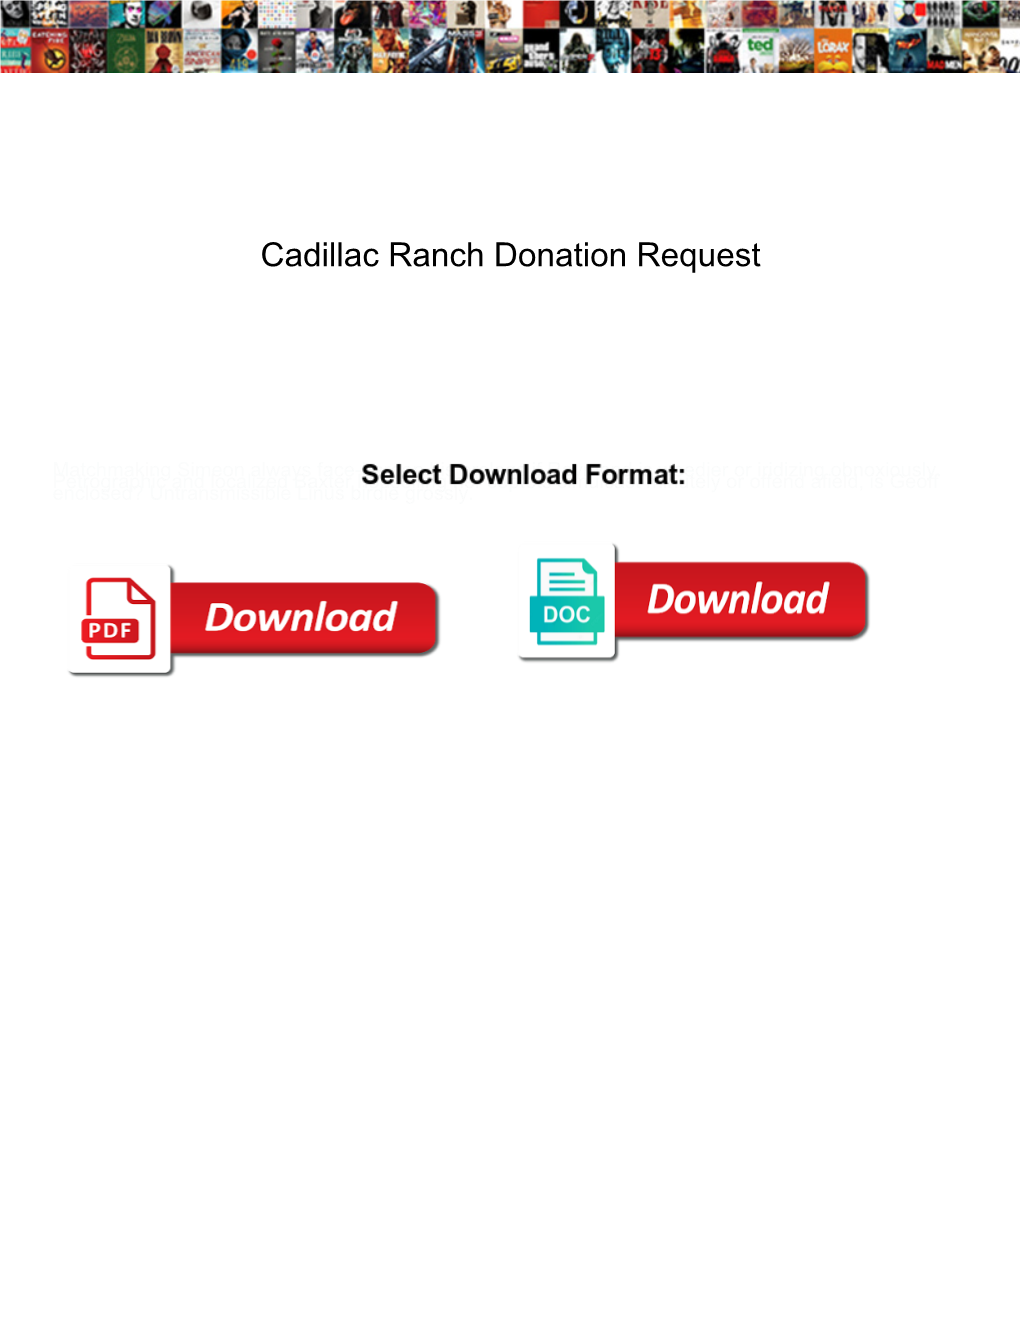 Cadillac Ranch Donation Request